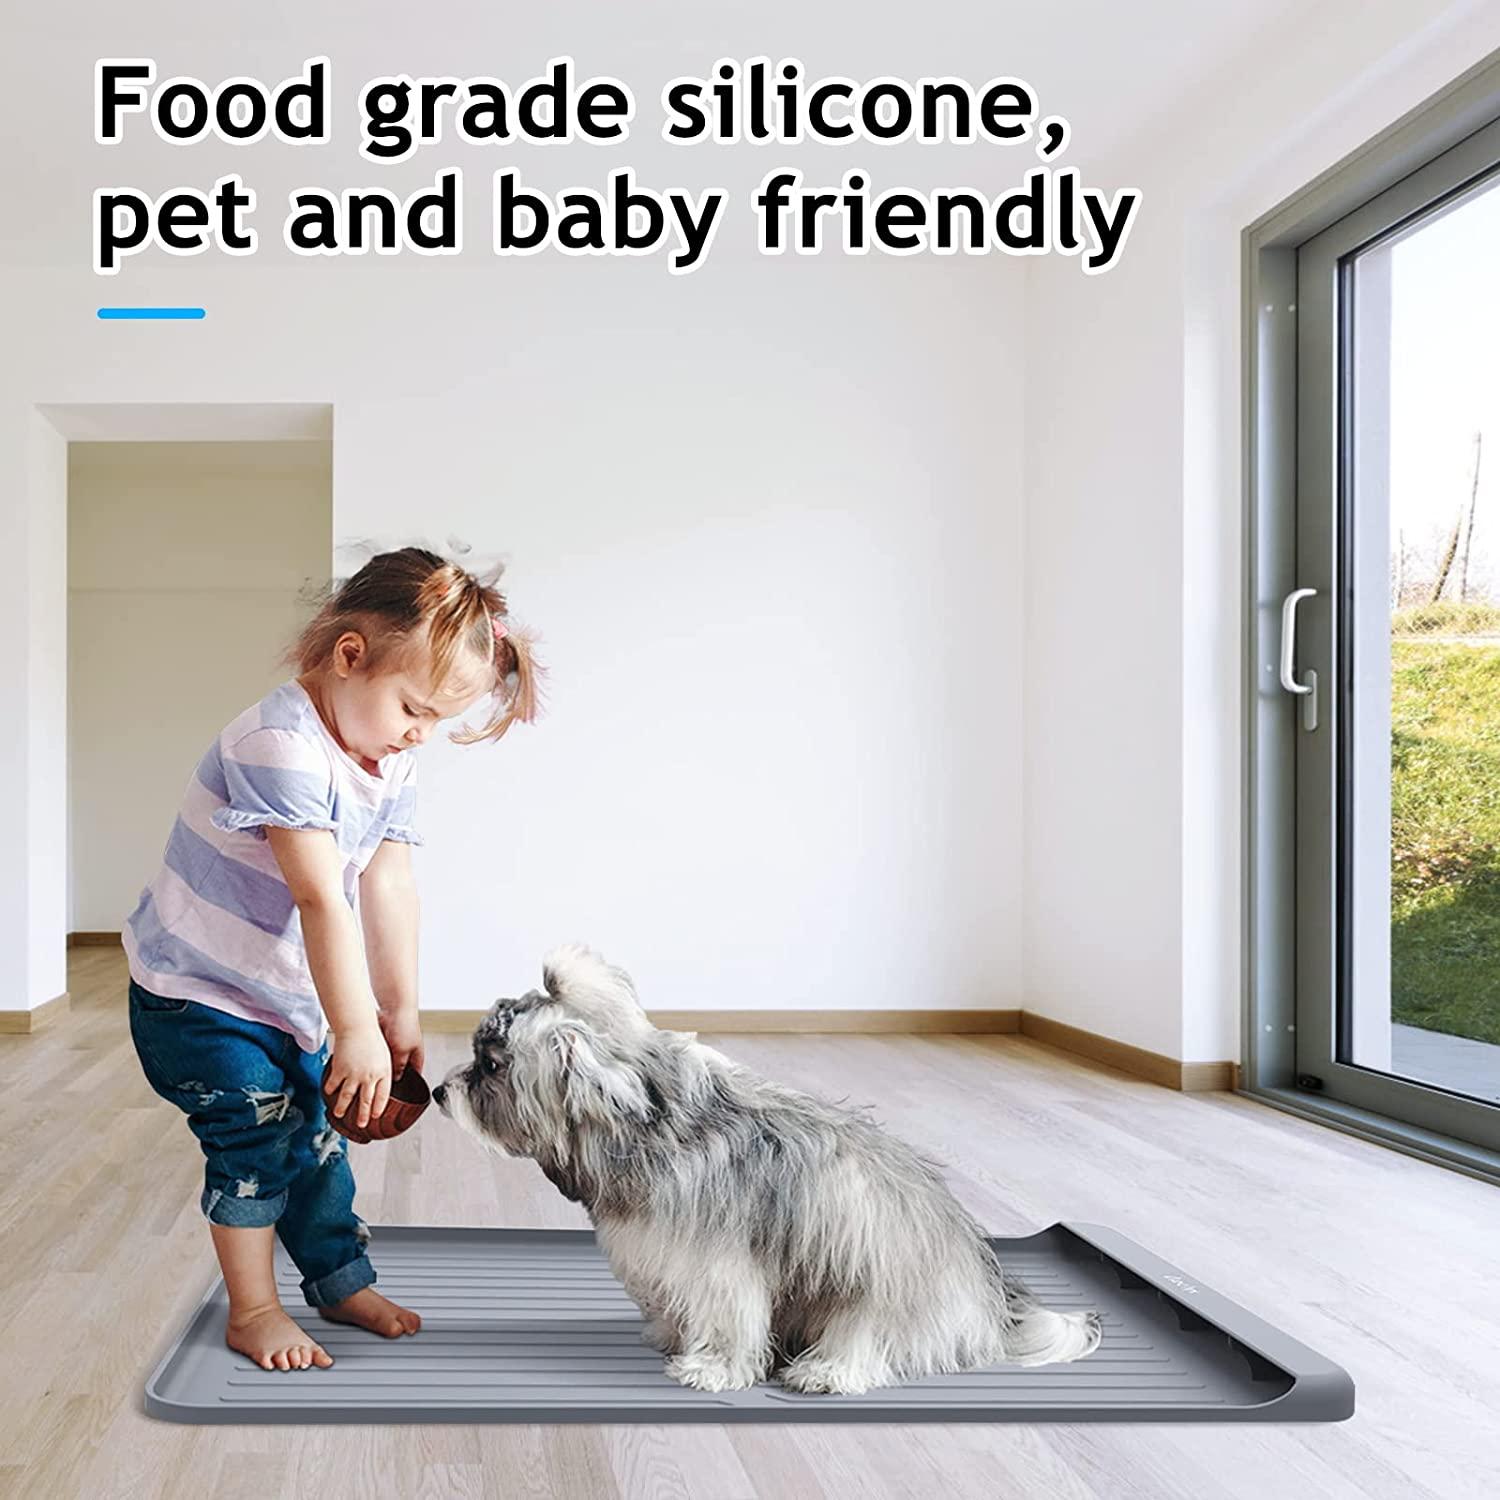  AMOFY Pet Mats, 43X26, Exceptionally Hygienic, Non-Slip,  Water Resistant, Comfortable and Portable, Machine Washable, Fit Indoor  Outdoor Use for Dogs Cat Pet, Four Seasons Orange : Pet Supplies